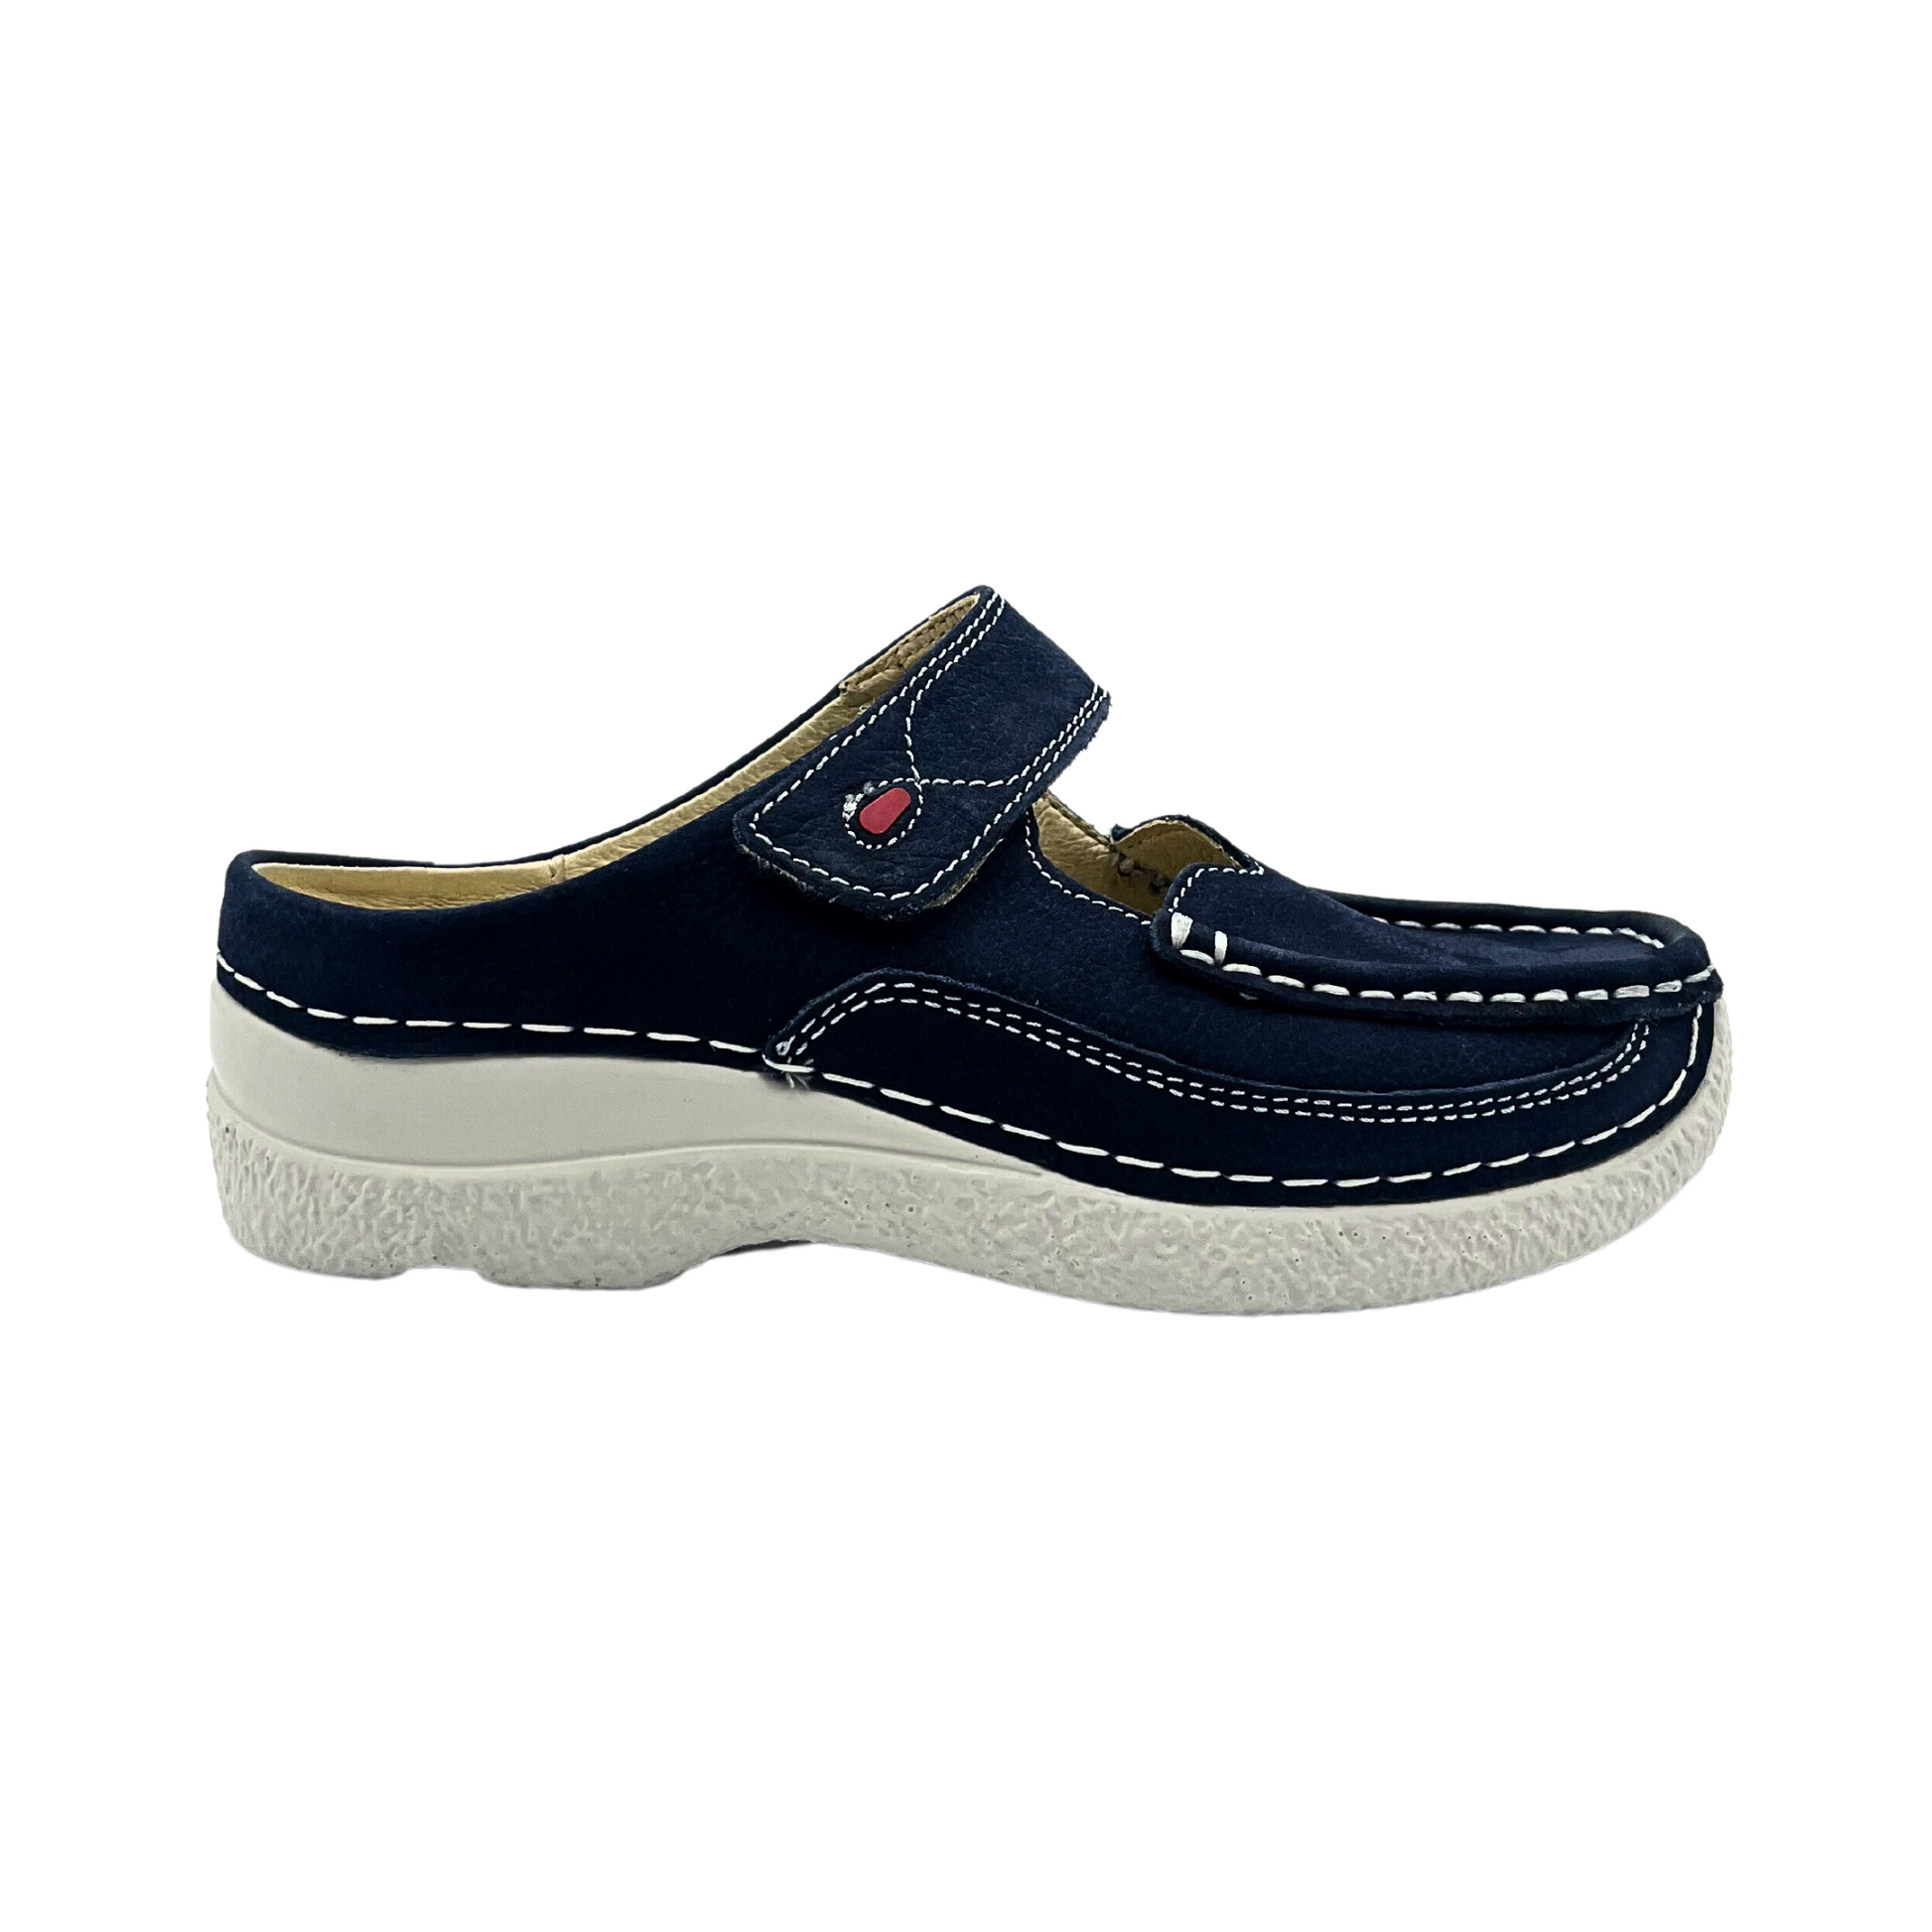 Outer view of Wolky roll slipper in blue.  Strap across the tope is adjustable with velcro tab.  Closed toe and open heel